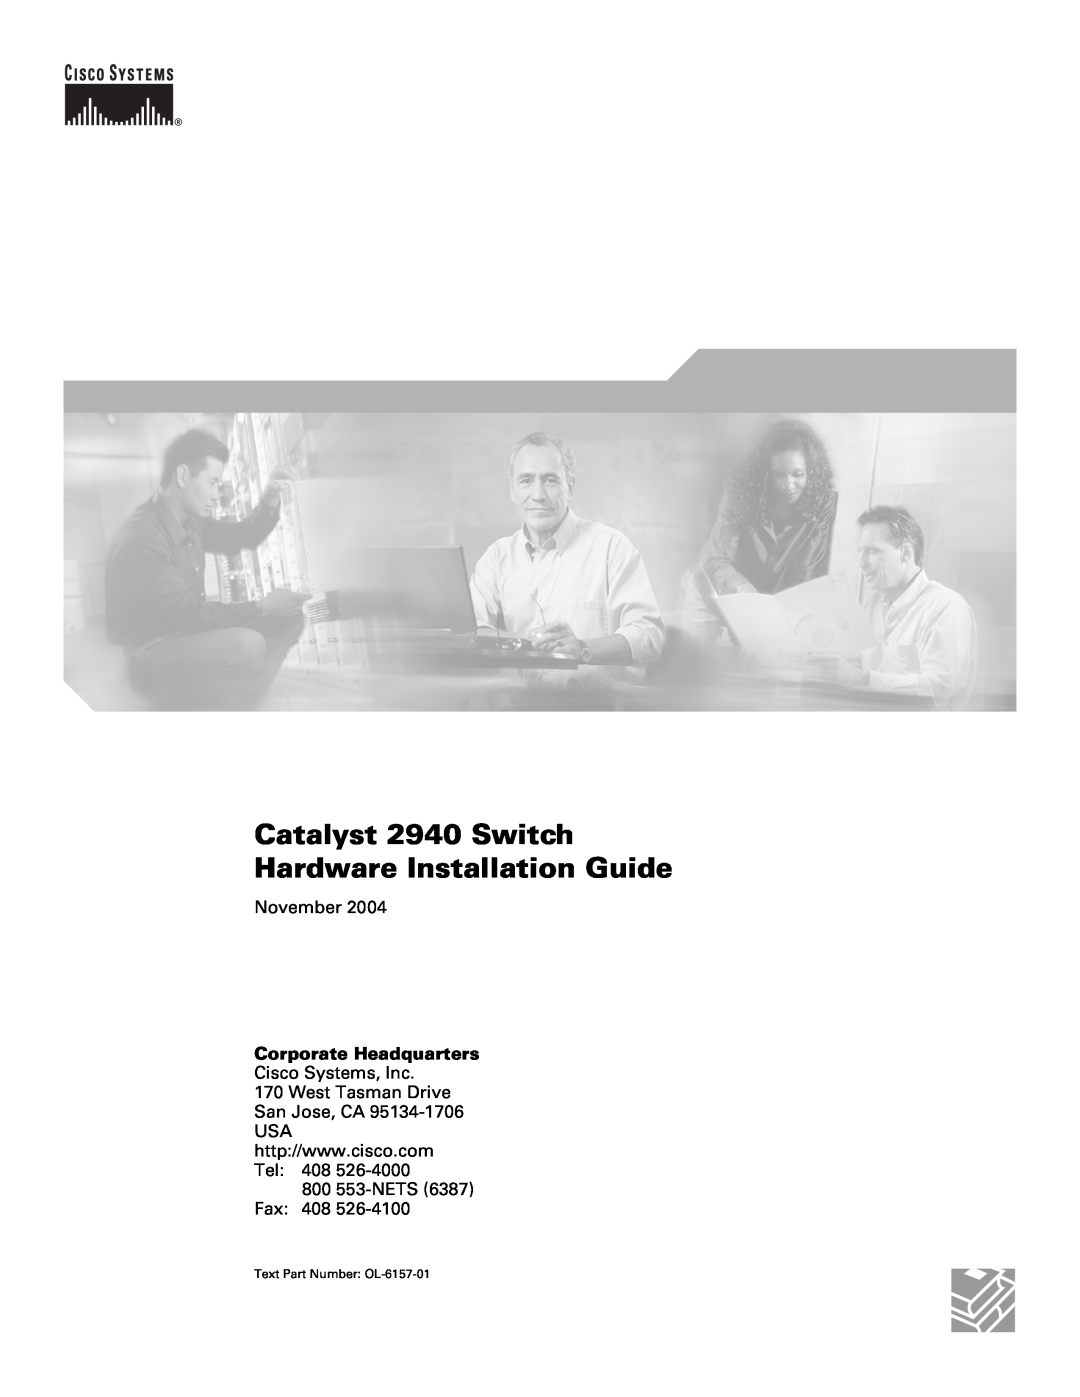 Cisco Systems OL-6157-01 manual Catalyst 2940 Switch Hardware Installation Guide, November, 800 553-NETS Fax 408 